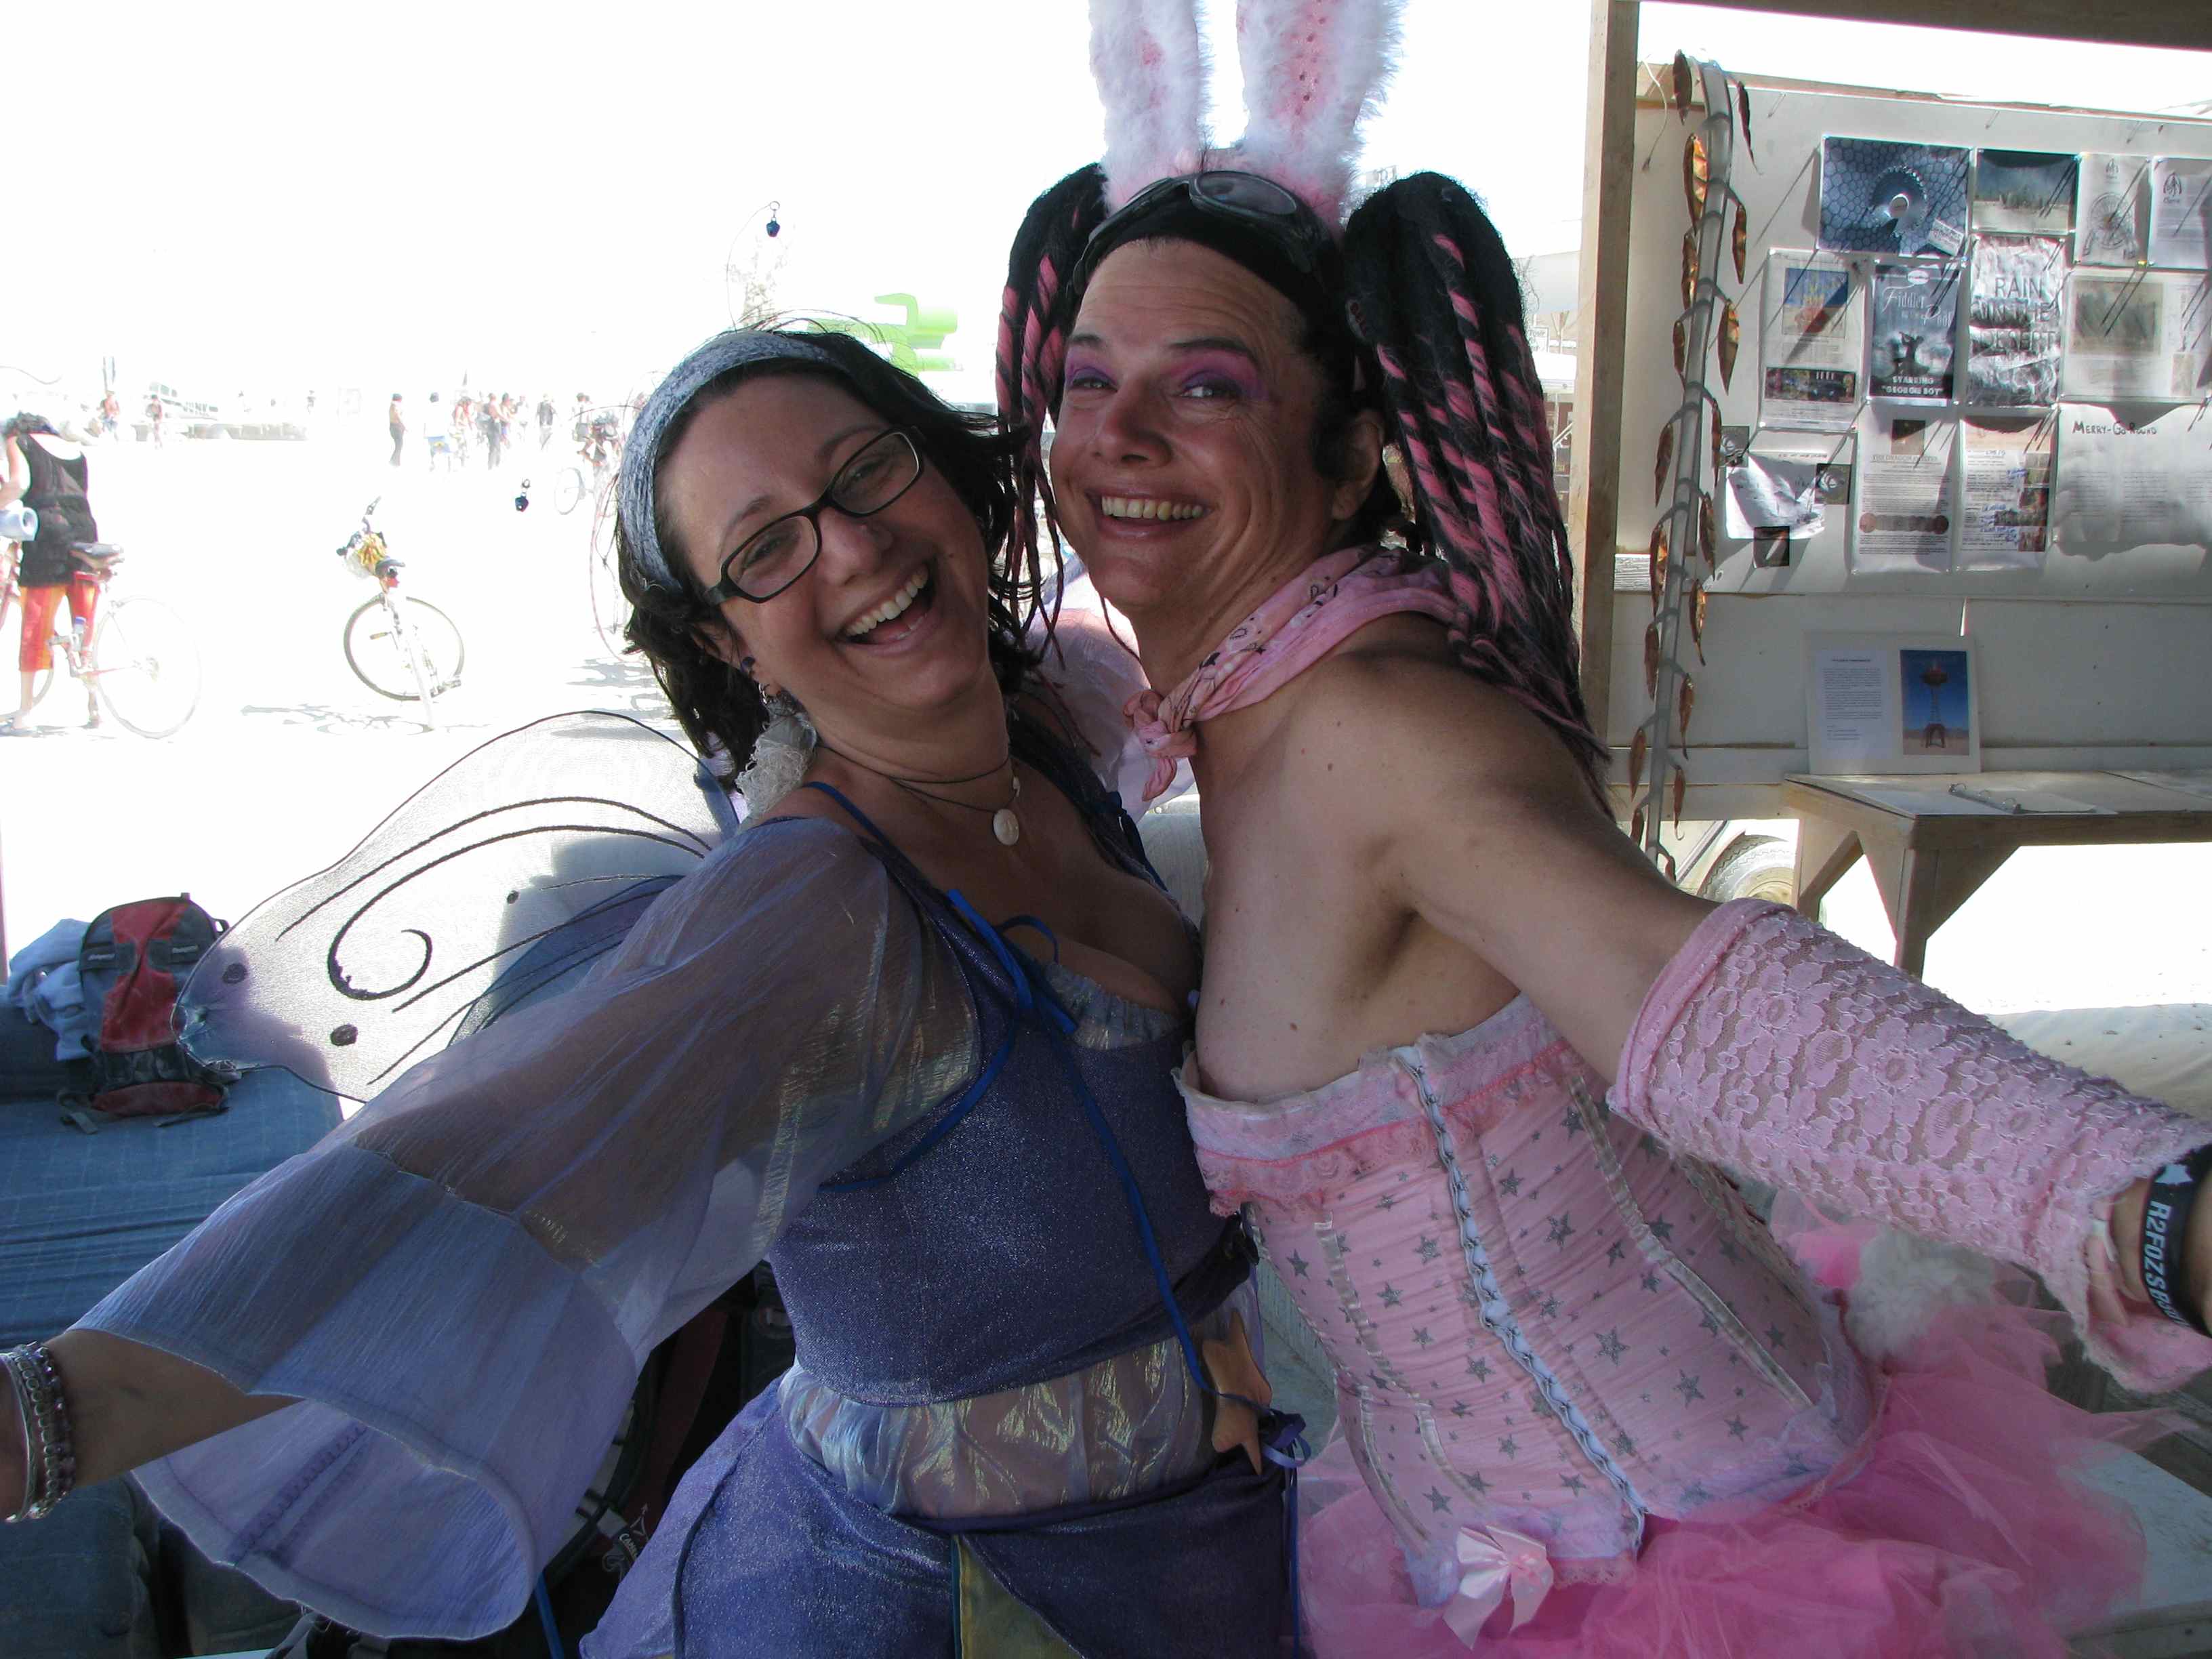 Purple Sparkle Fairy and Pink Bunny-Burning Man 2011